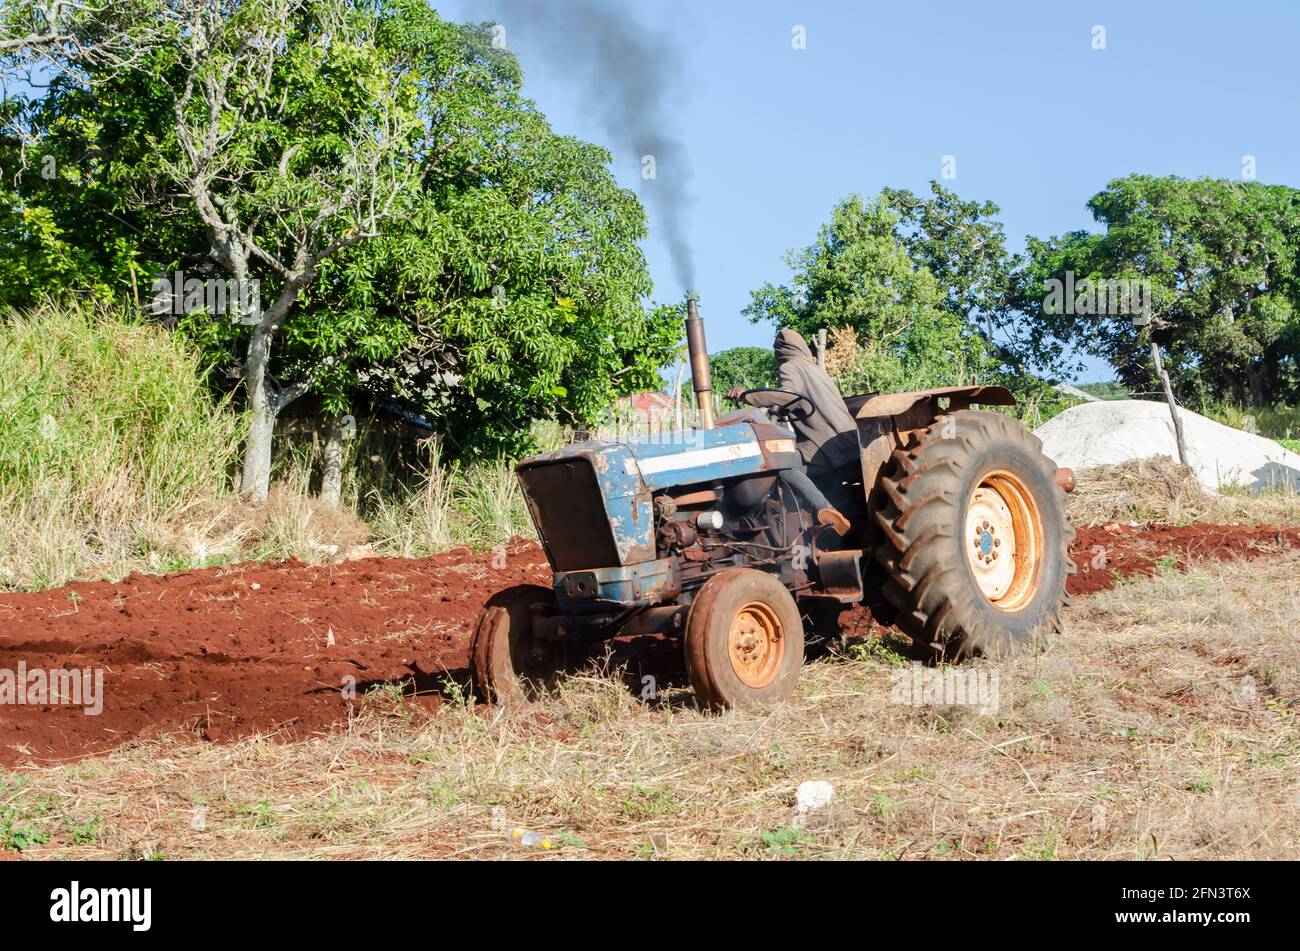 Tractor Plowing Land For Farming Stock Photo